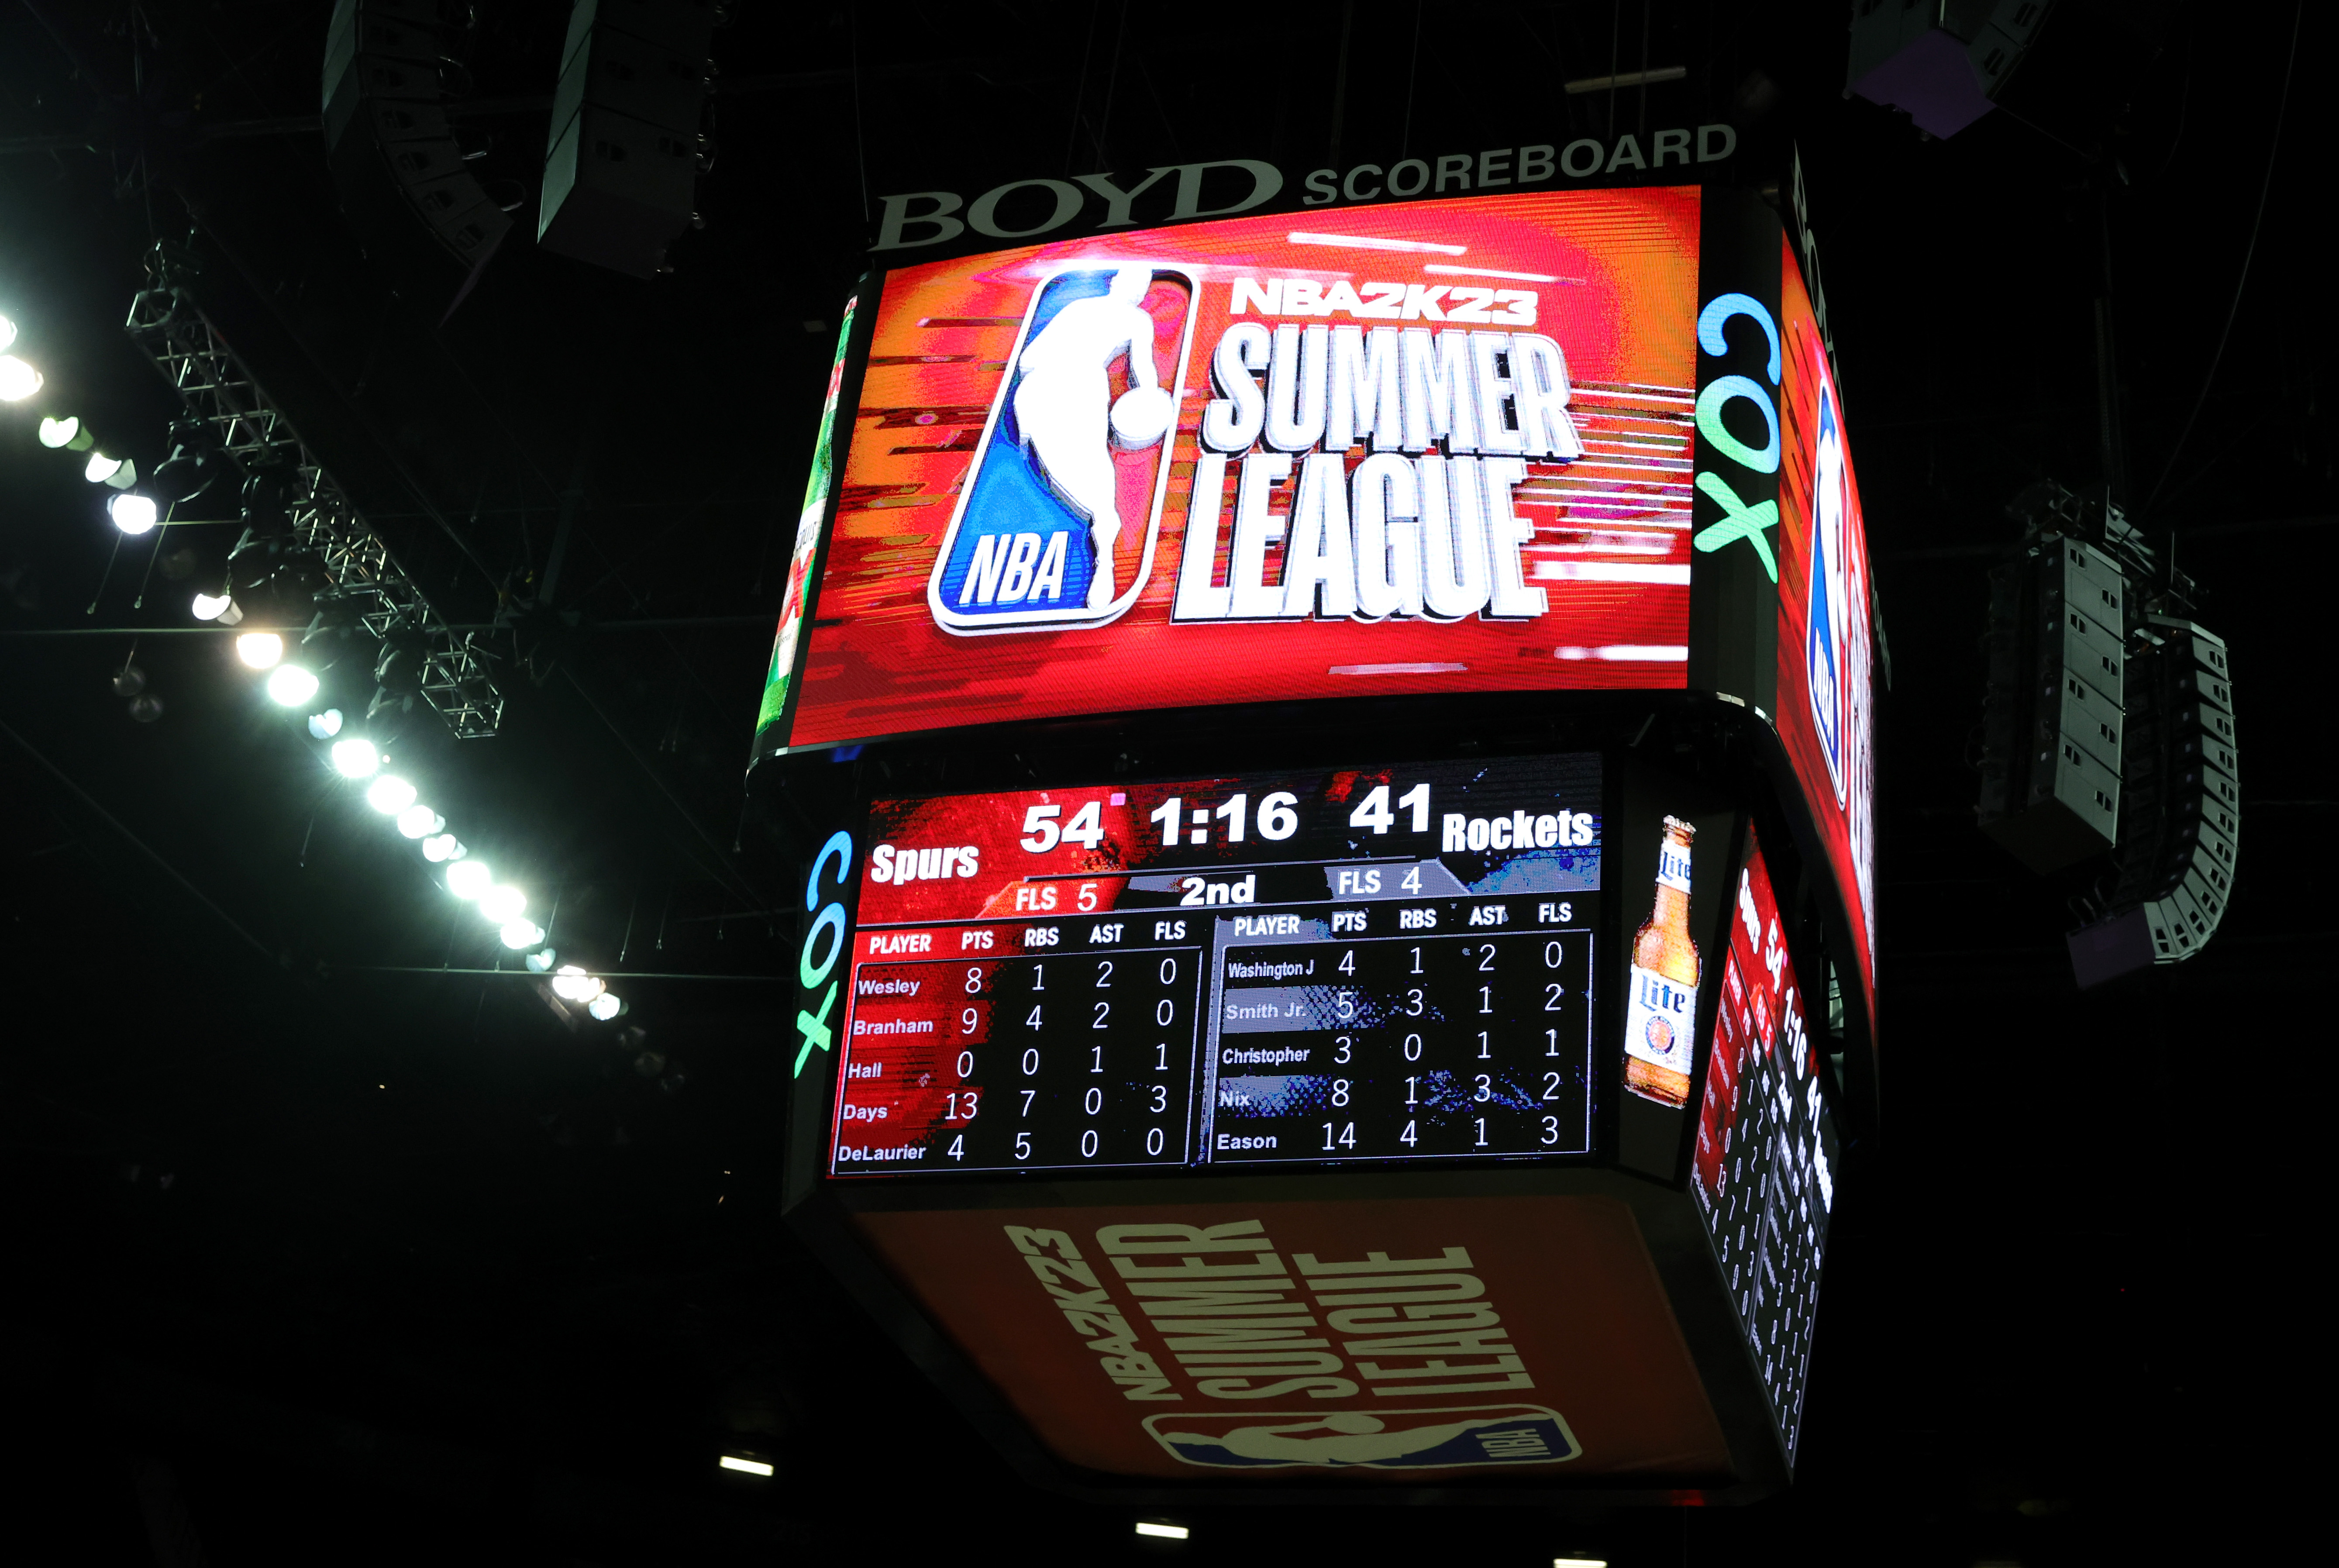 LAS VEGAS, NEVADA - JULY 11: A scoreboard shows an NBA Summer League logo during a game between the San Antonio Spurs and the Houston Rockets during the 2022 NBA Summer League at the Thomas &amp; Mack Center on July 11, 2022 in Las Vegas, Nevada.